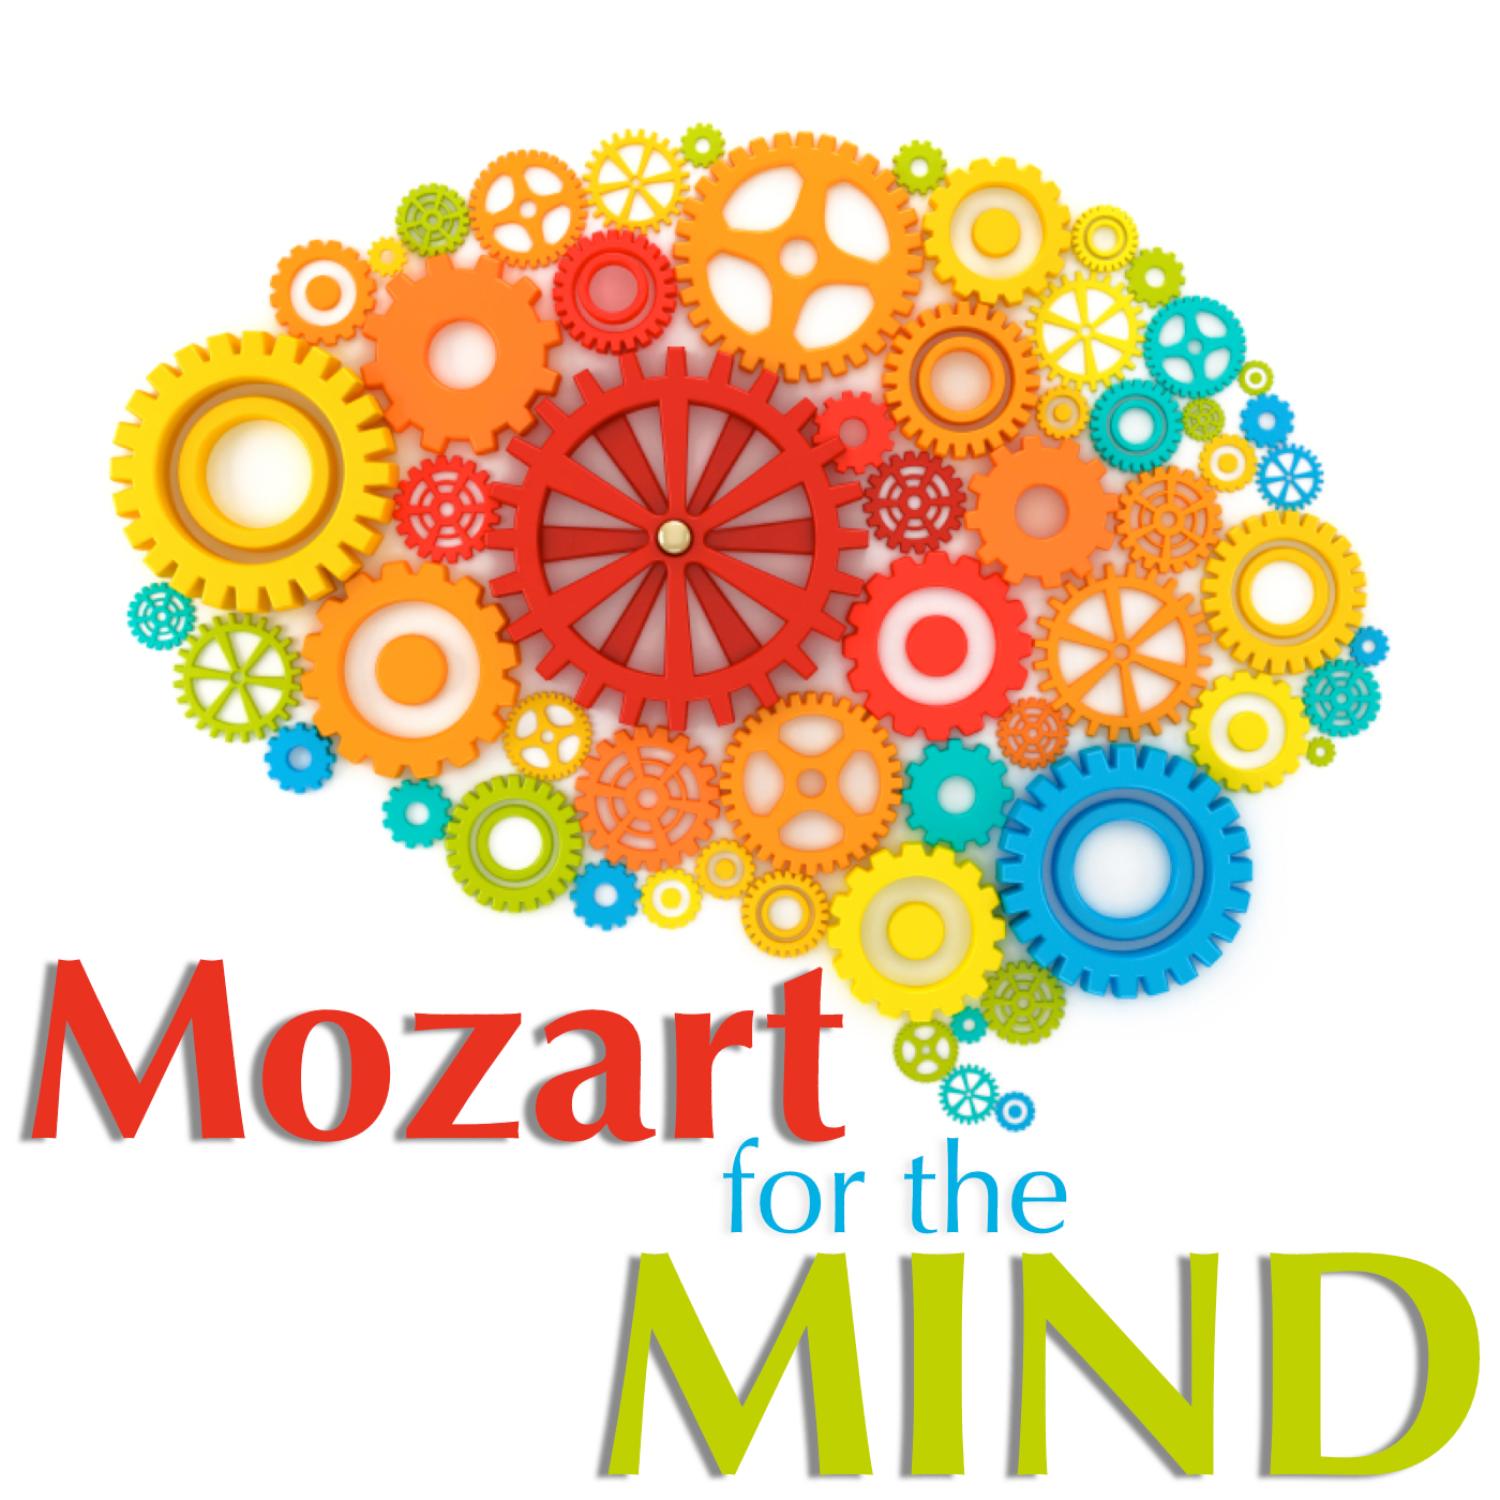 Mozart for the Mind